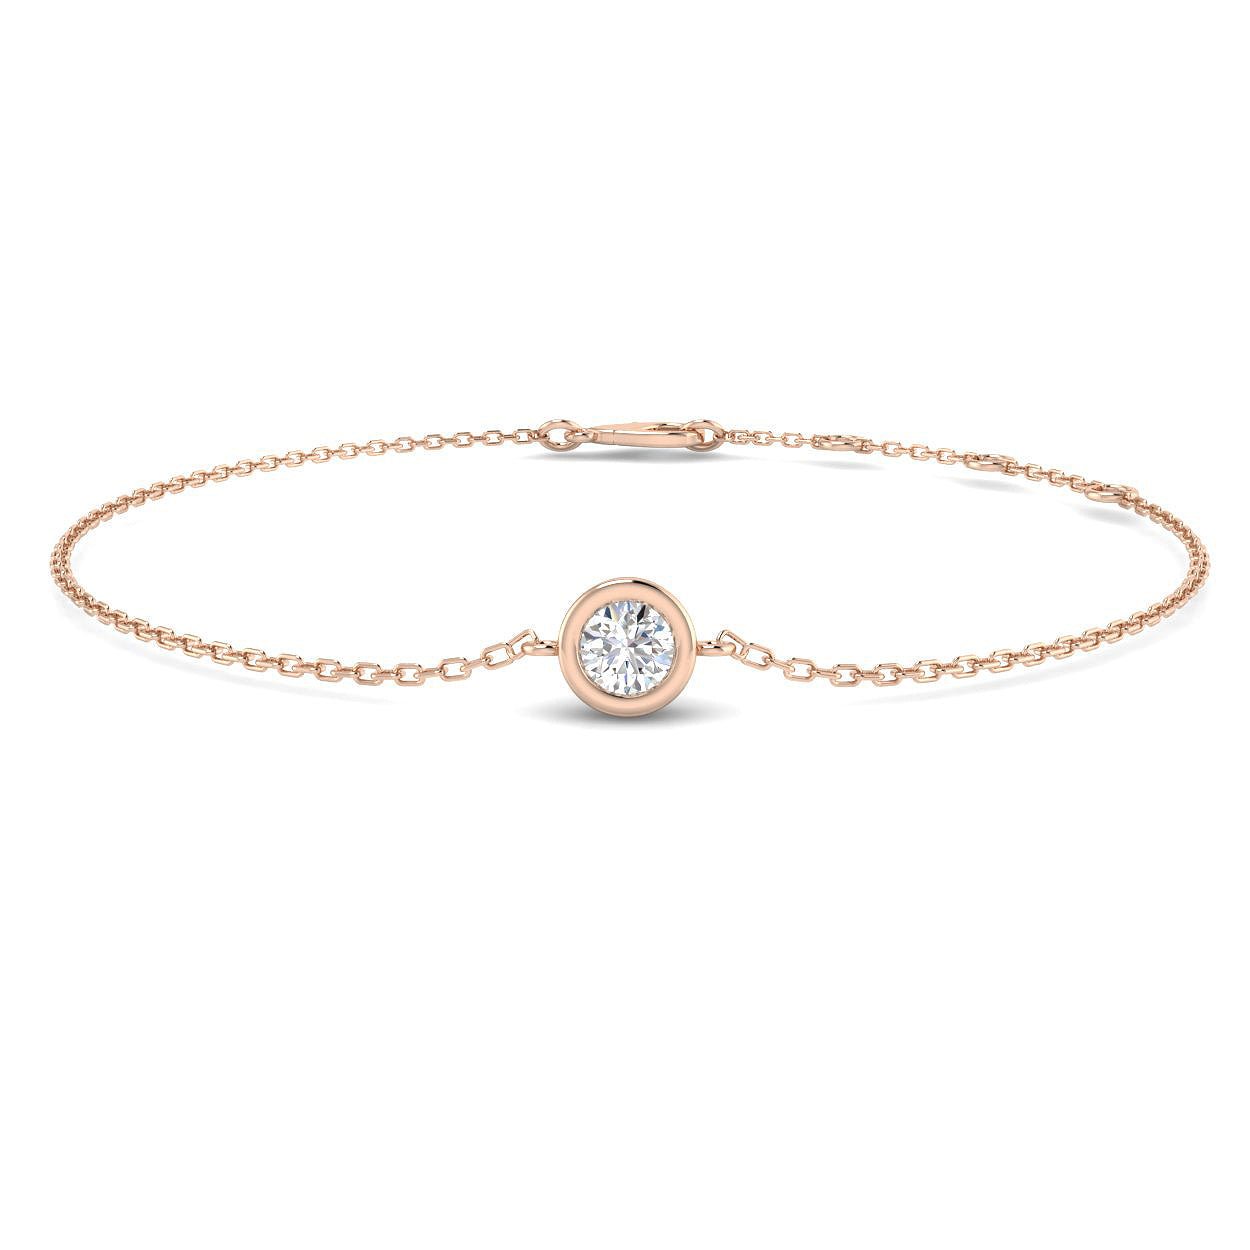 Solitaire Diamond Bracelet 0.25ct G/SI Quality in 18k Rose Gold - All Diamond